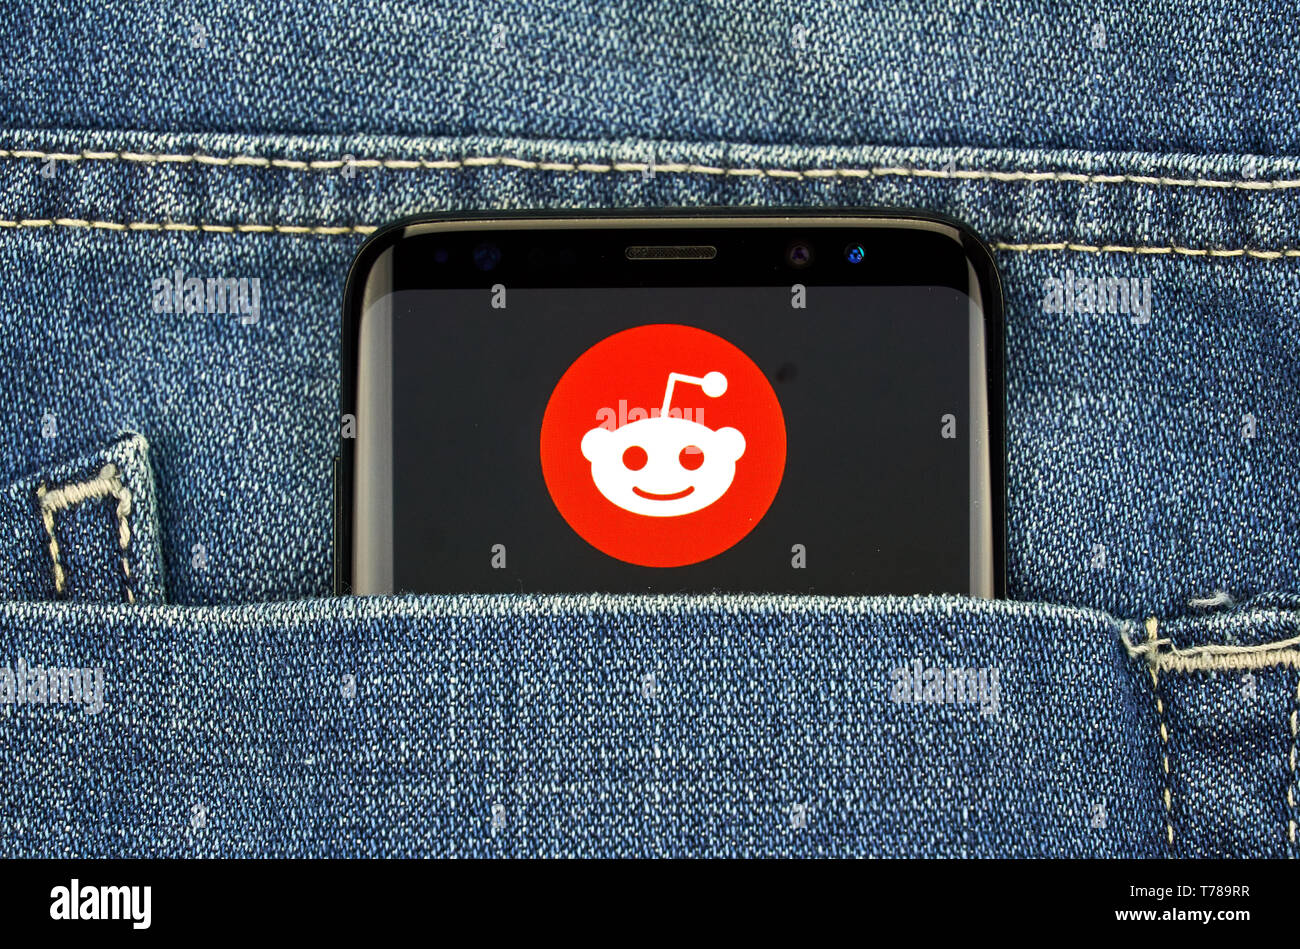 MONTREAL, CANADA - December 23, 2018: Reddit logo and android app on Samsung s8 screen in a blue jeans pocket. Reddit is an American social news aggre Stock Photo